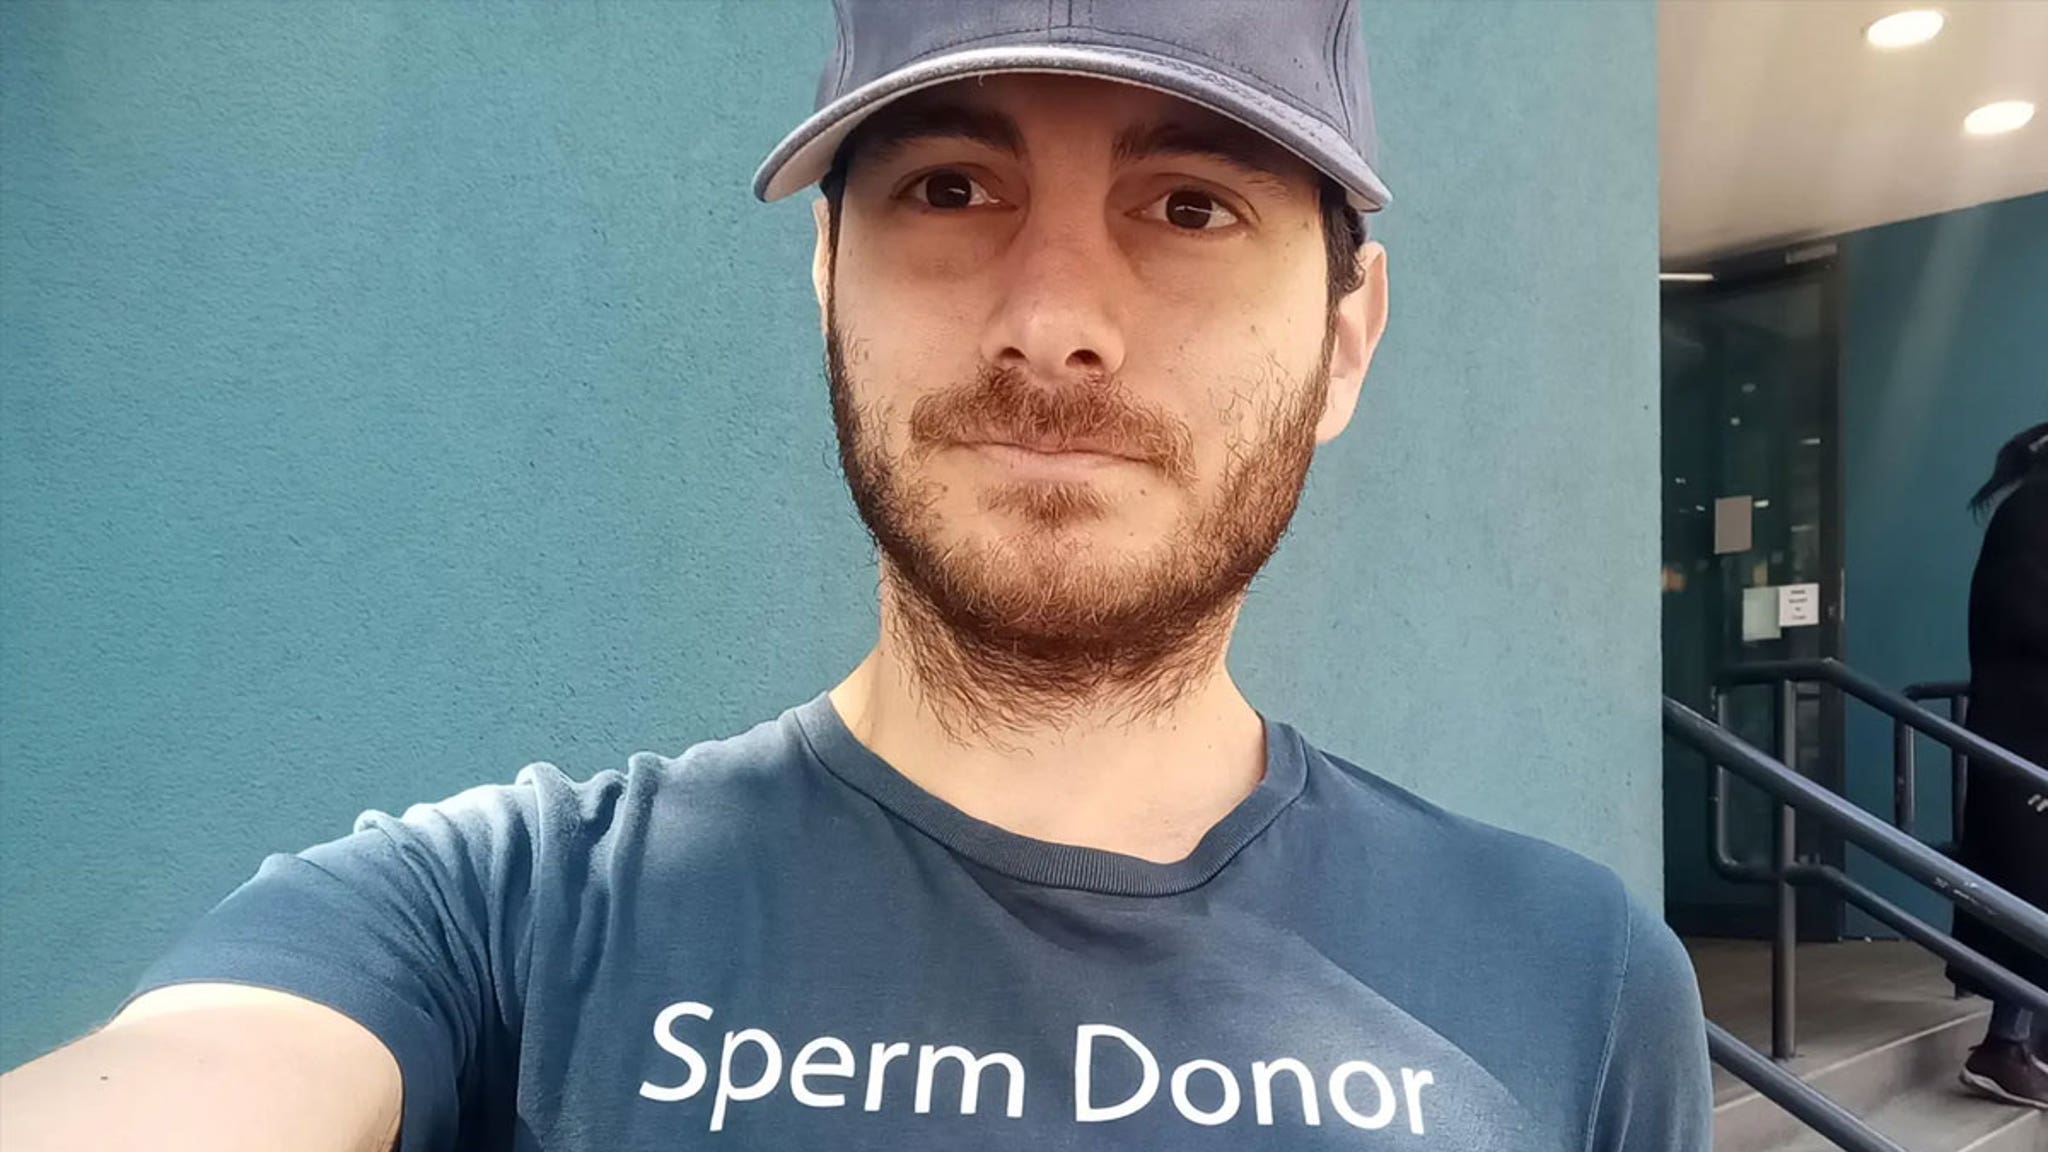 Sperm Donor with 47 Kids Says Women Won't Date Him